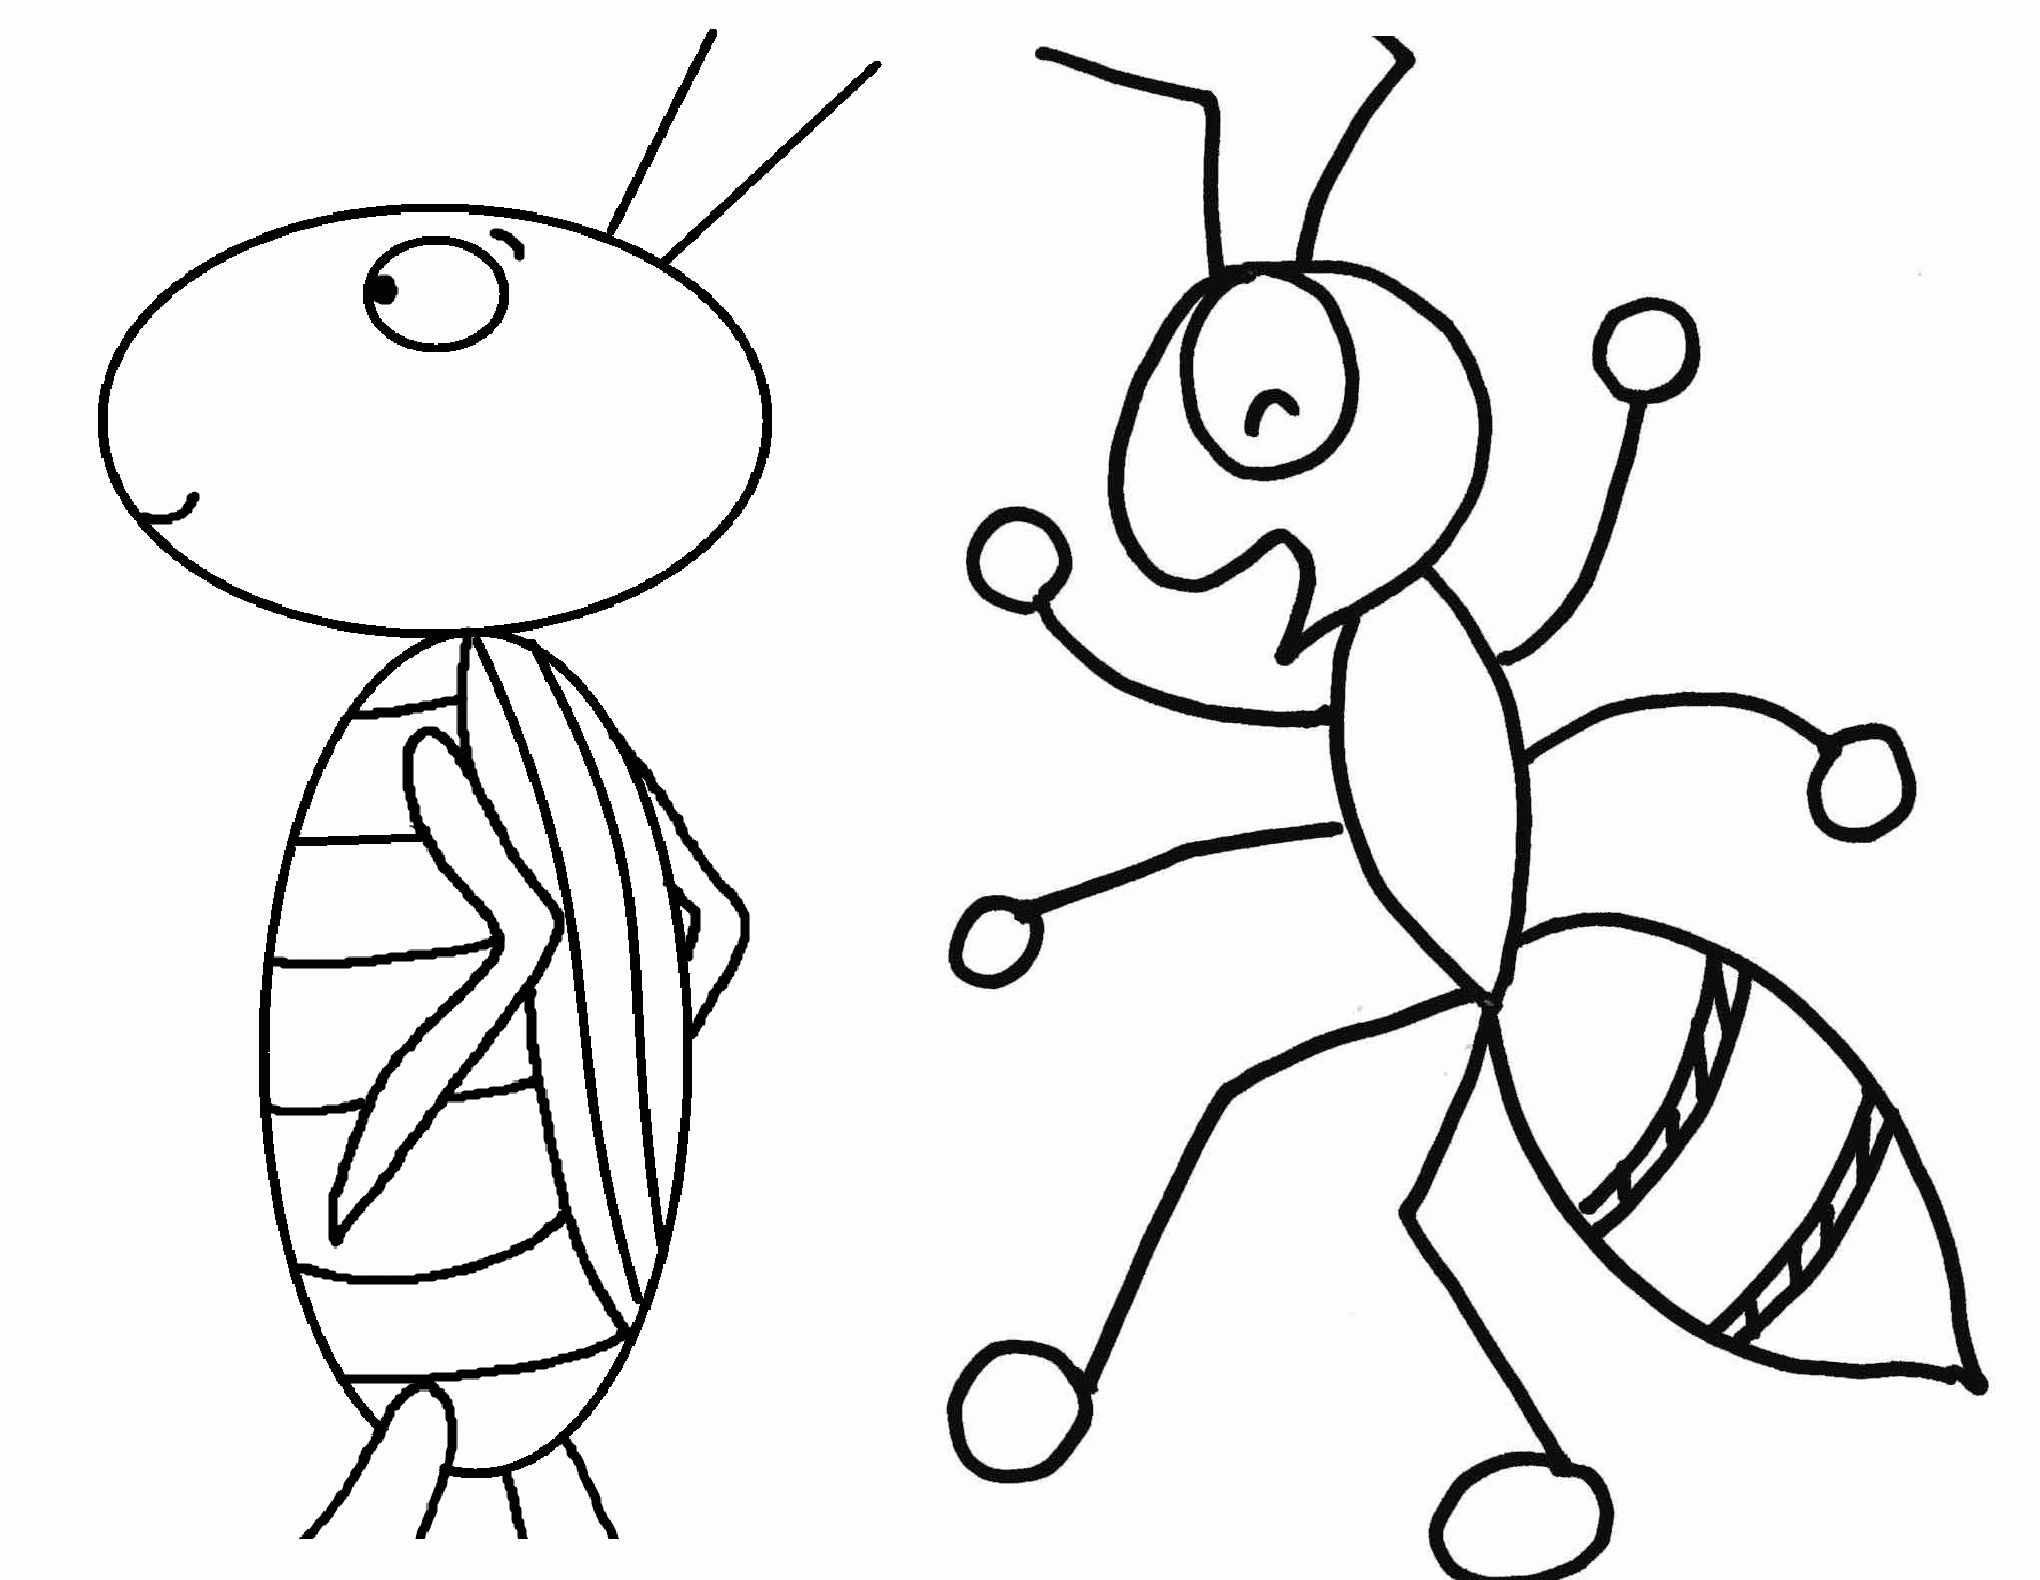 The Ant And The Grasshopper Coloring Pages   Coloring Home